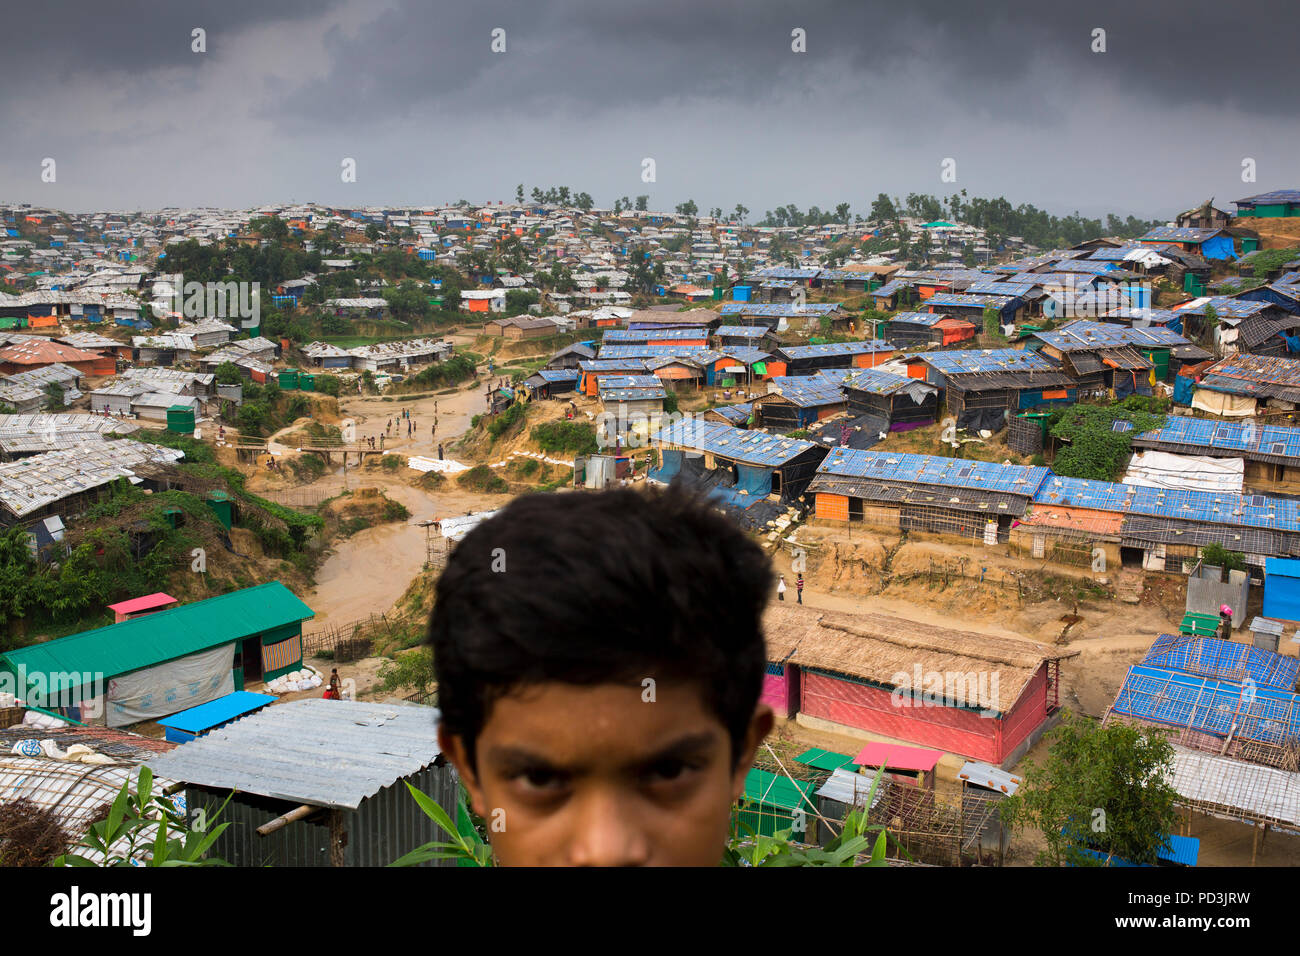 COX'S BAZAR, BANGLADESH - AUGUST 04 : View of a rohingya refugee camp in Cox's Bazar , Bangladesh on August 04, 2018. Stock Photo